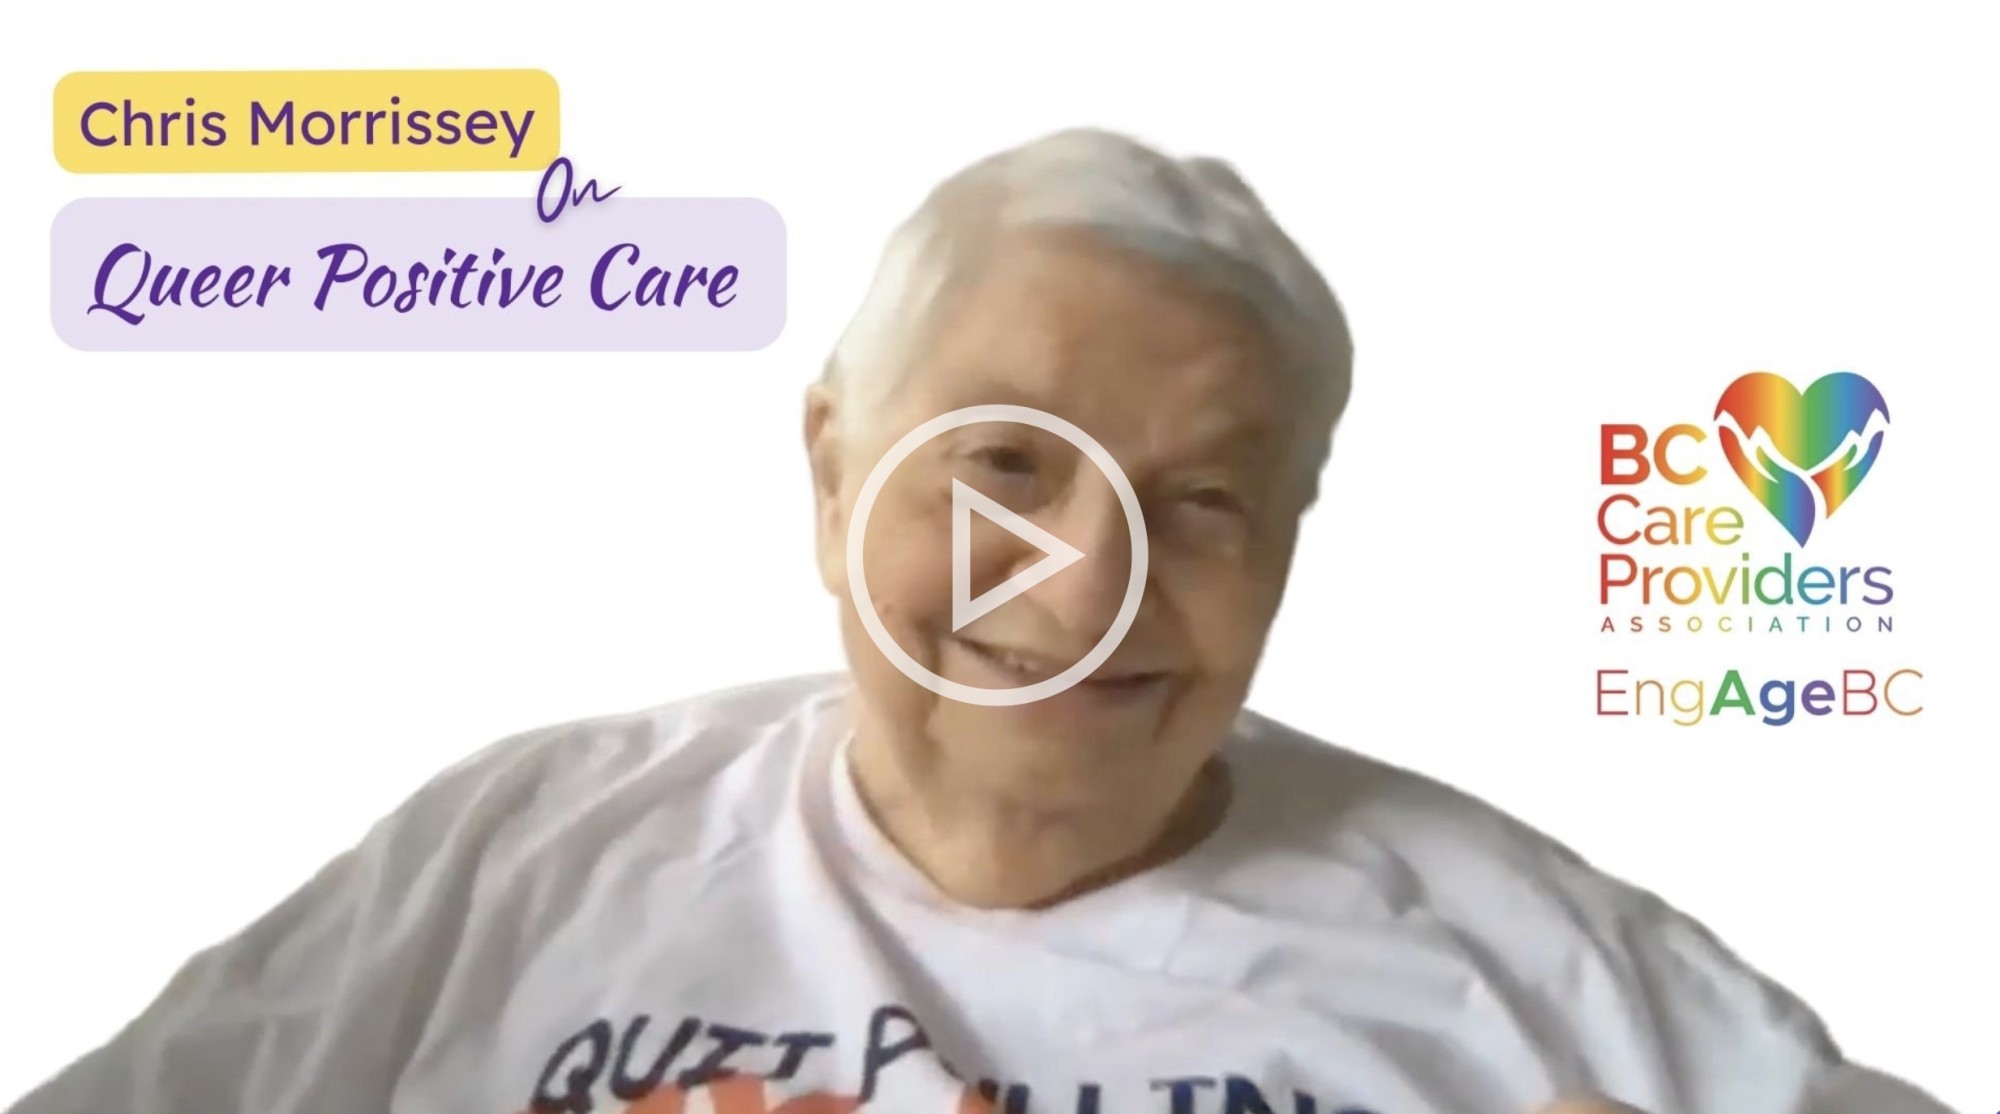 Chris Morrissey #PrideMonth interview: Creating queer positive care for seniors